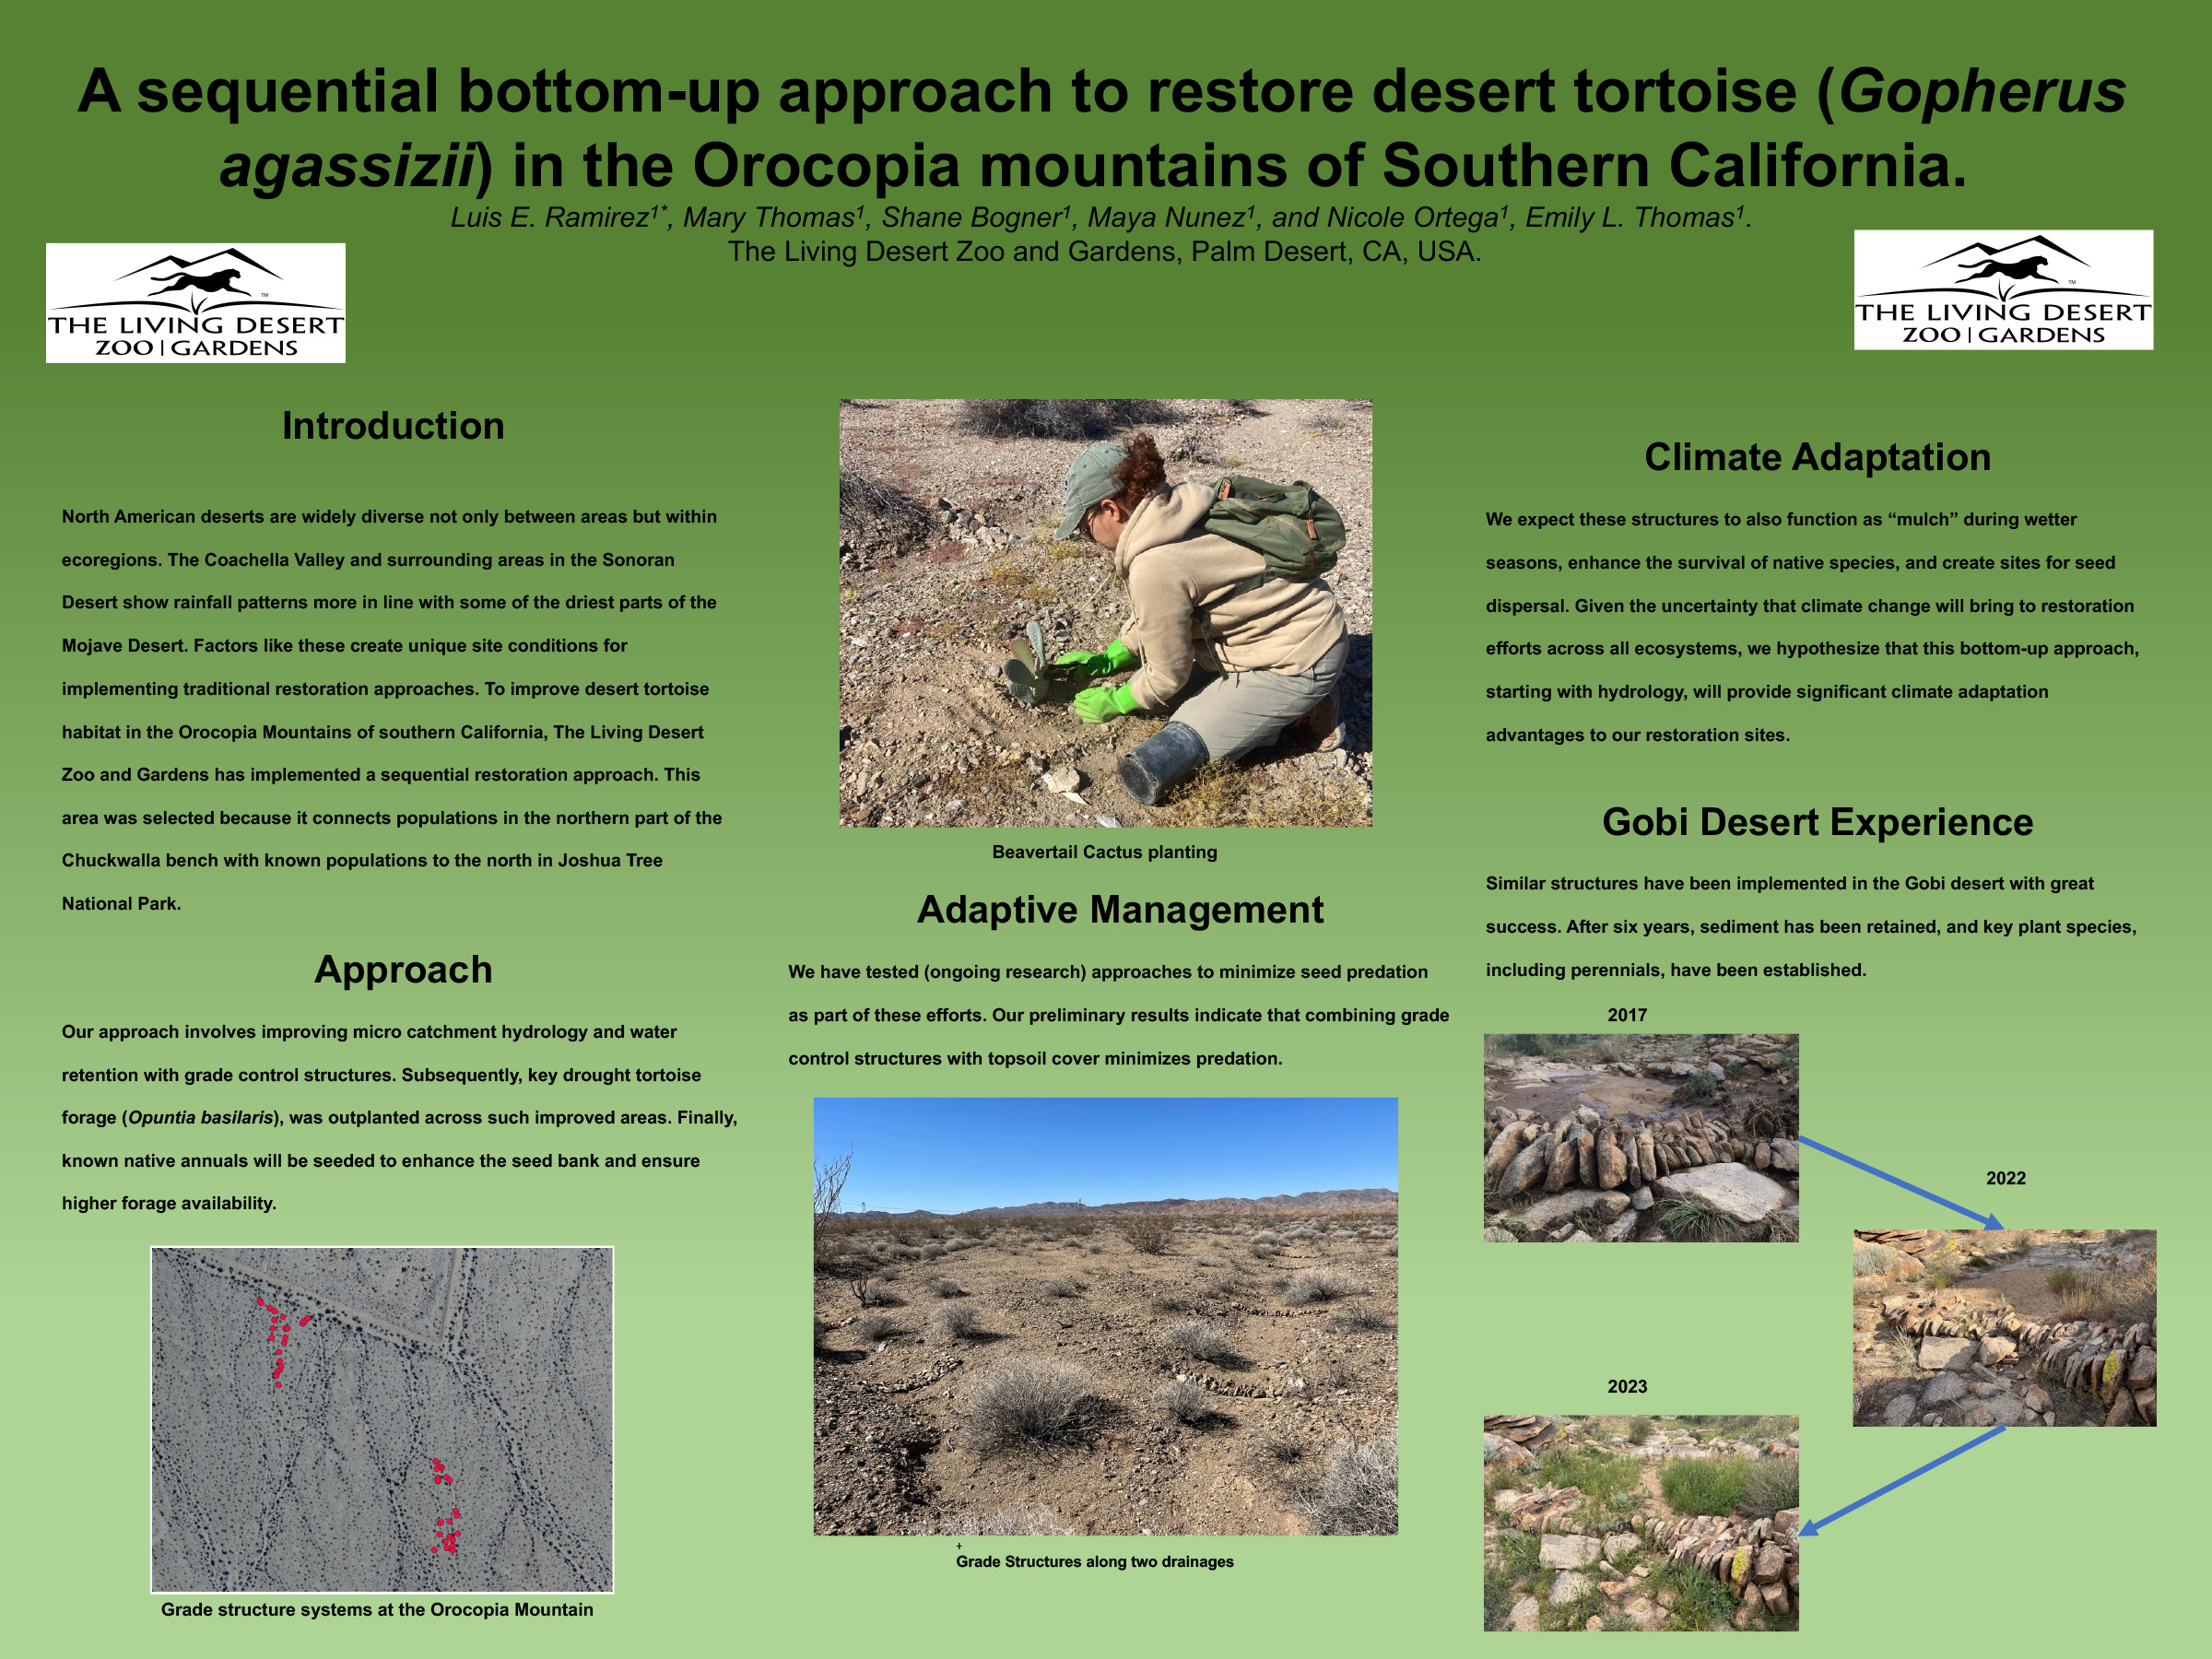 A Sequential Bottom-up Approach to Restore Desert Tortoise (Gopherus Agassizii) in the Orocopia Mountains of Southern California